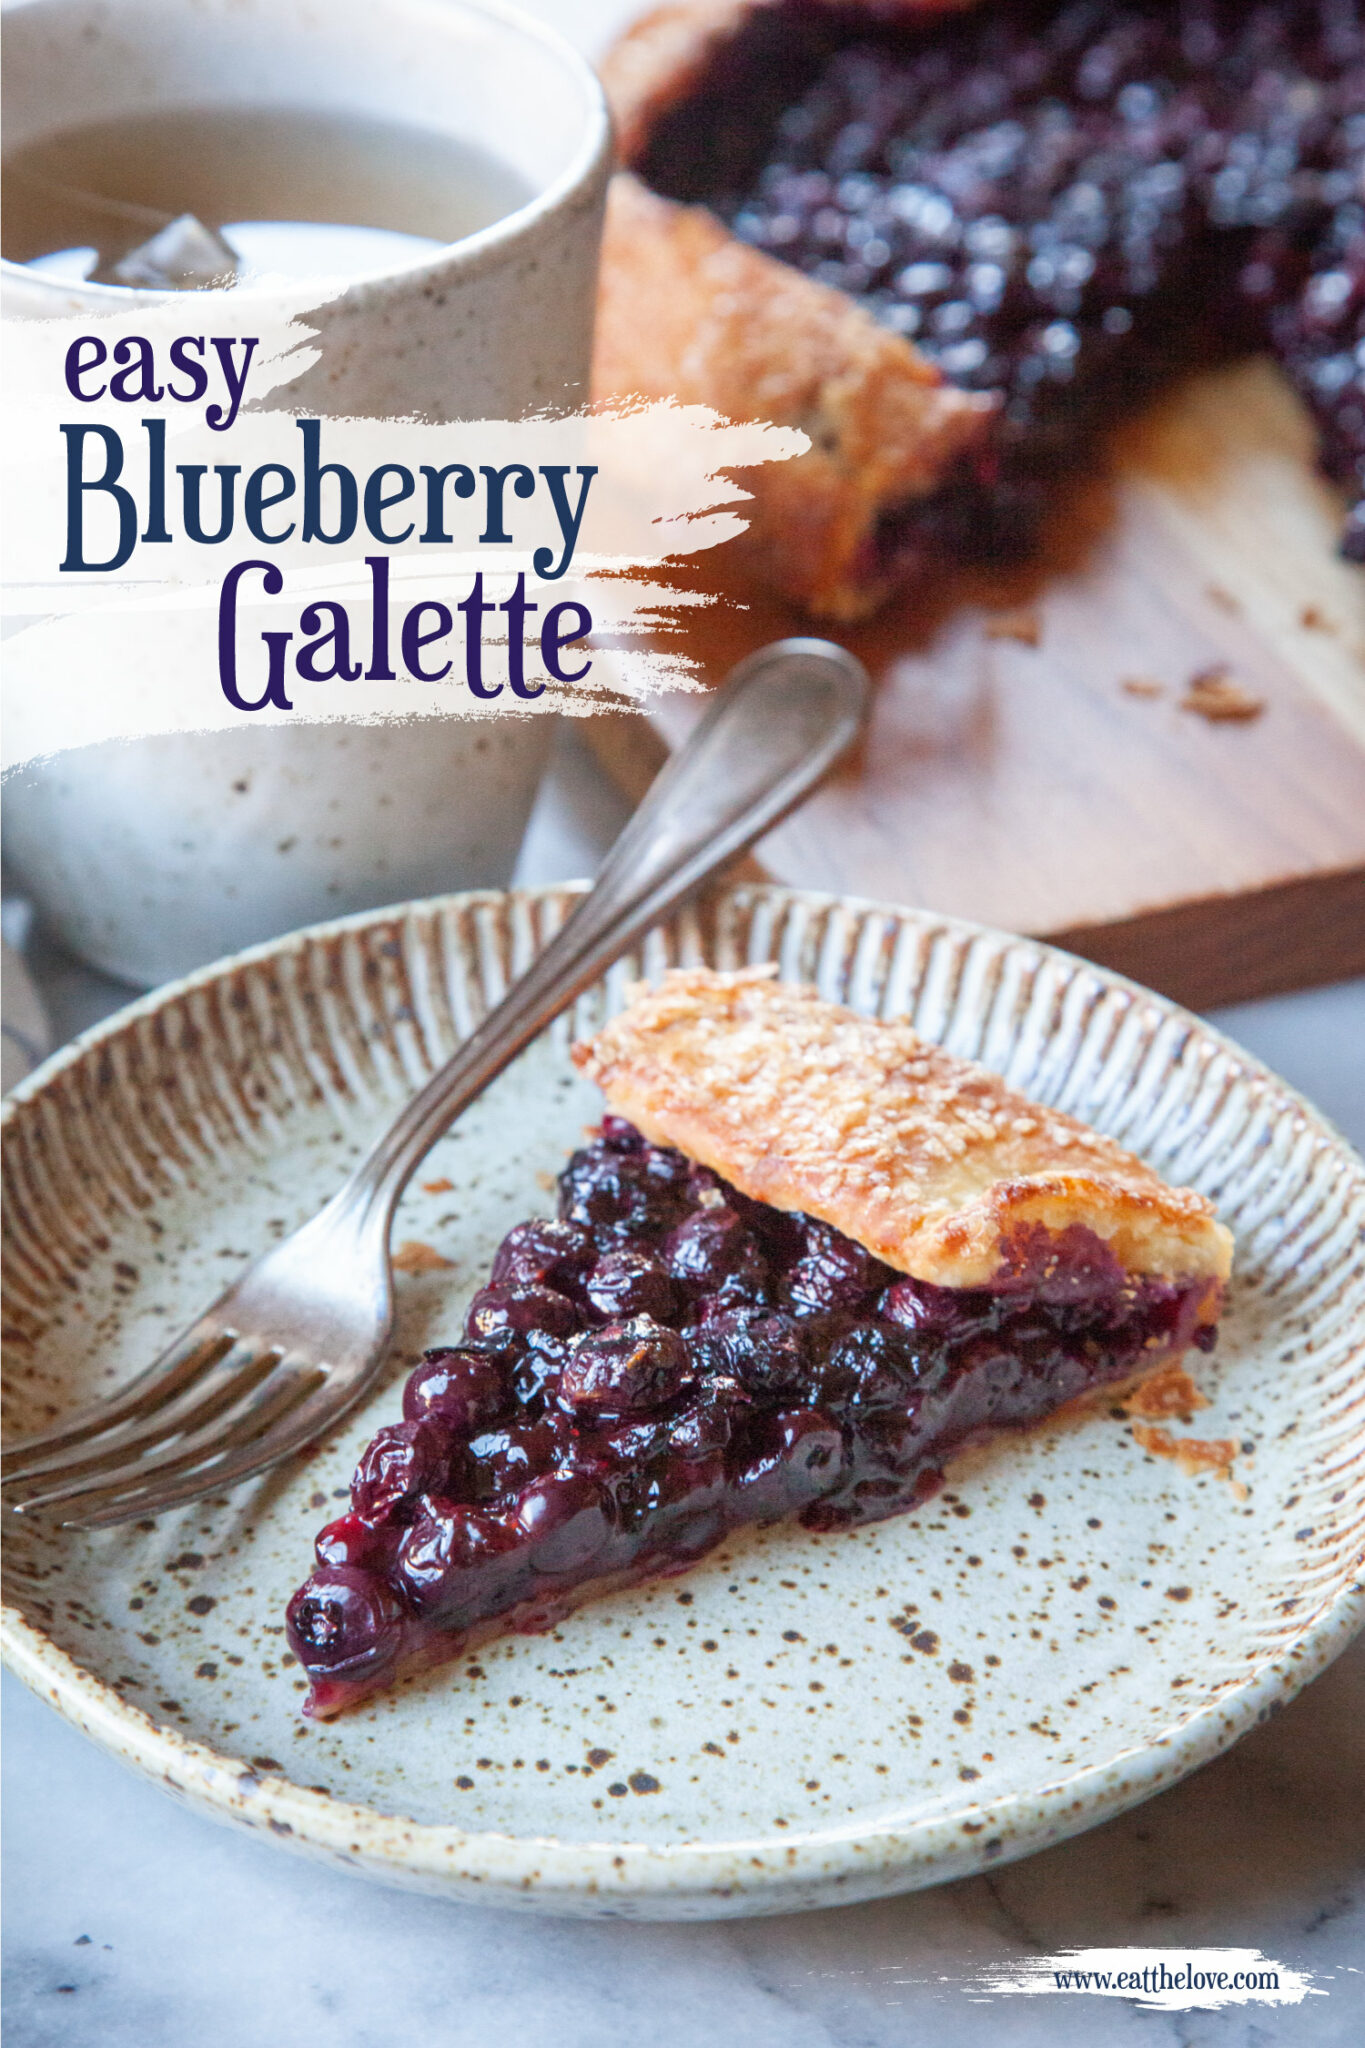 A slice of blueberry galette on a ceramic plate. There is a mug of tea behind it along with the remaining galette on a wooden cutting board. The title on the image says "Easy Blueberry Galette".